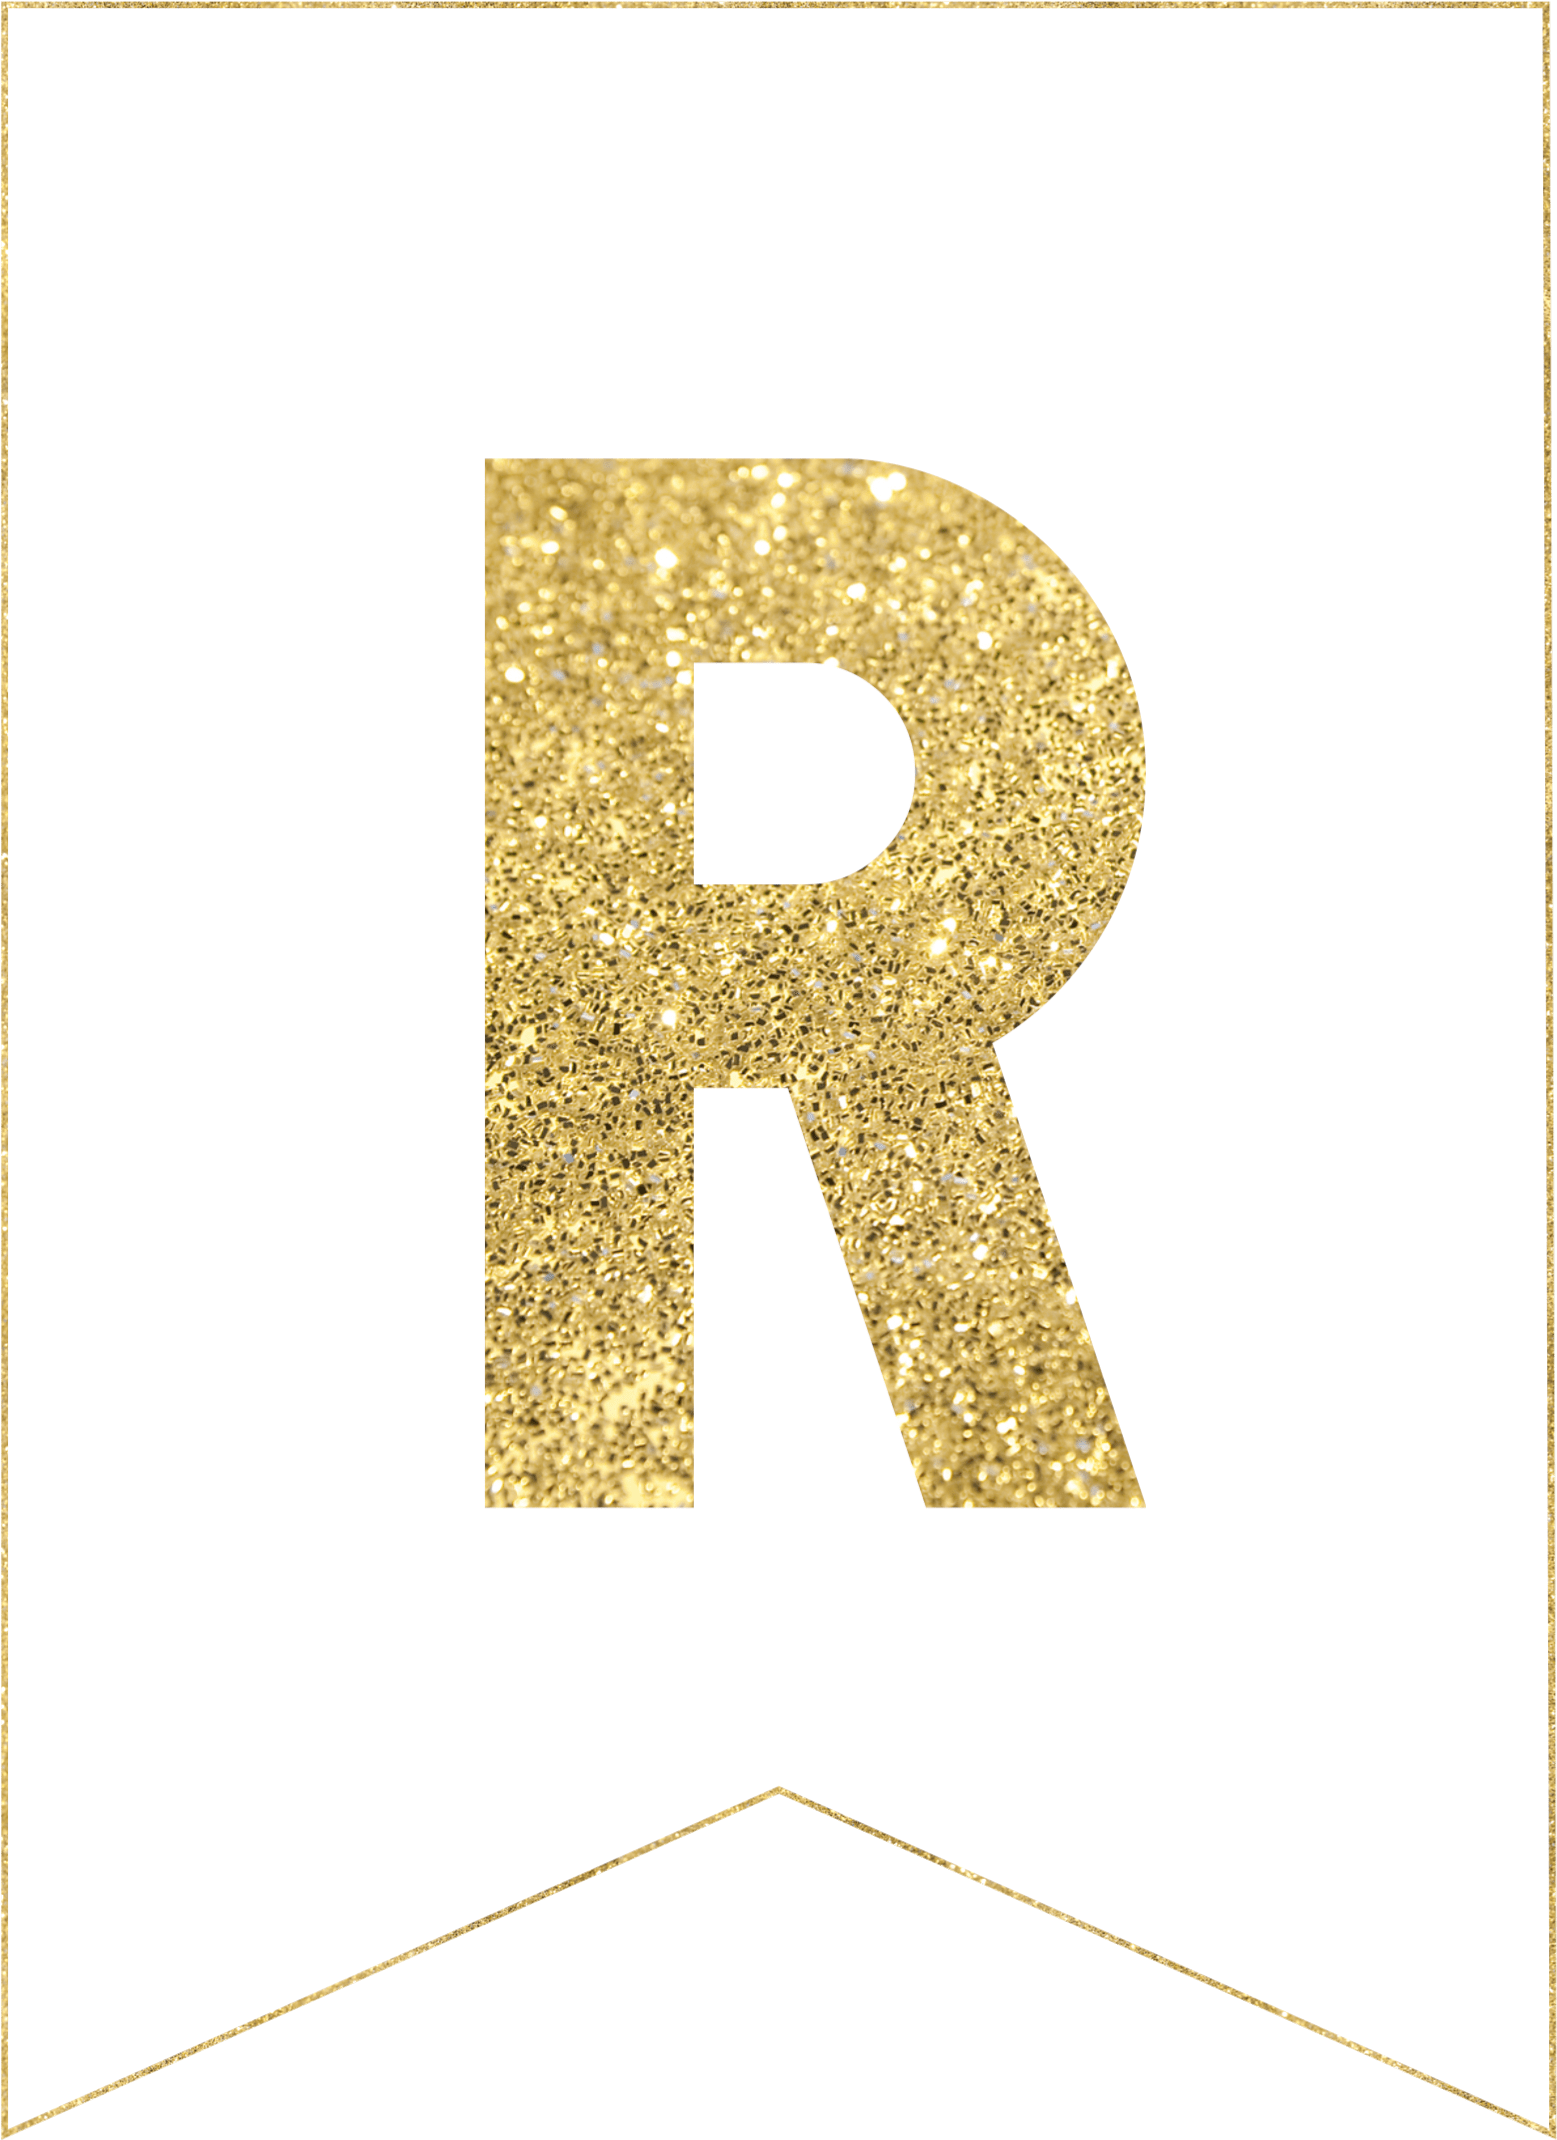 Gold Free Printable Banner Letters Use Our Gold Free Gold Glitter